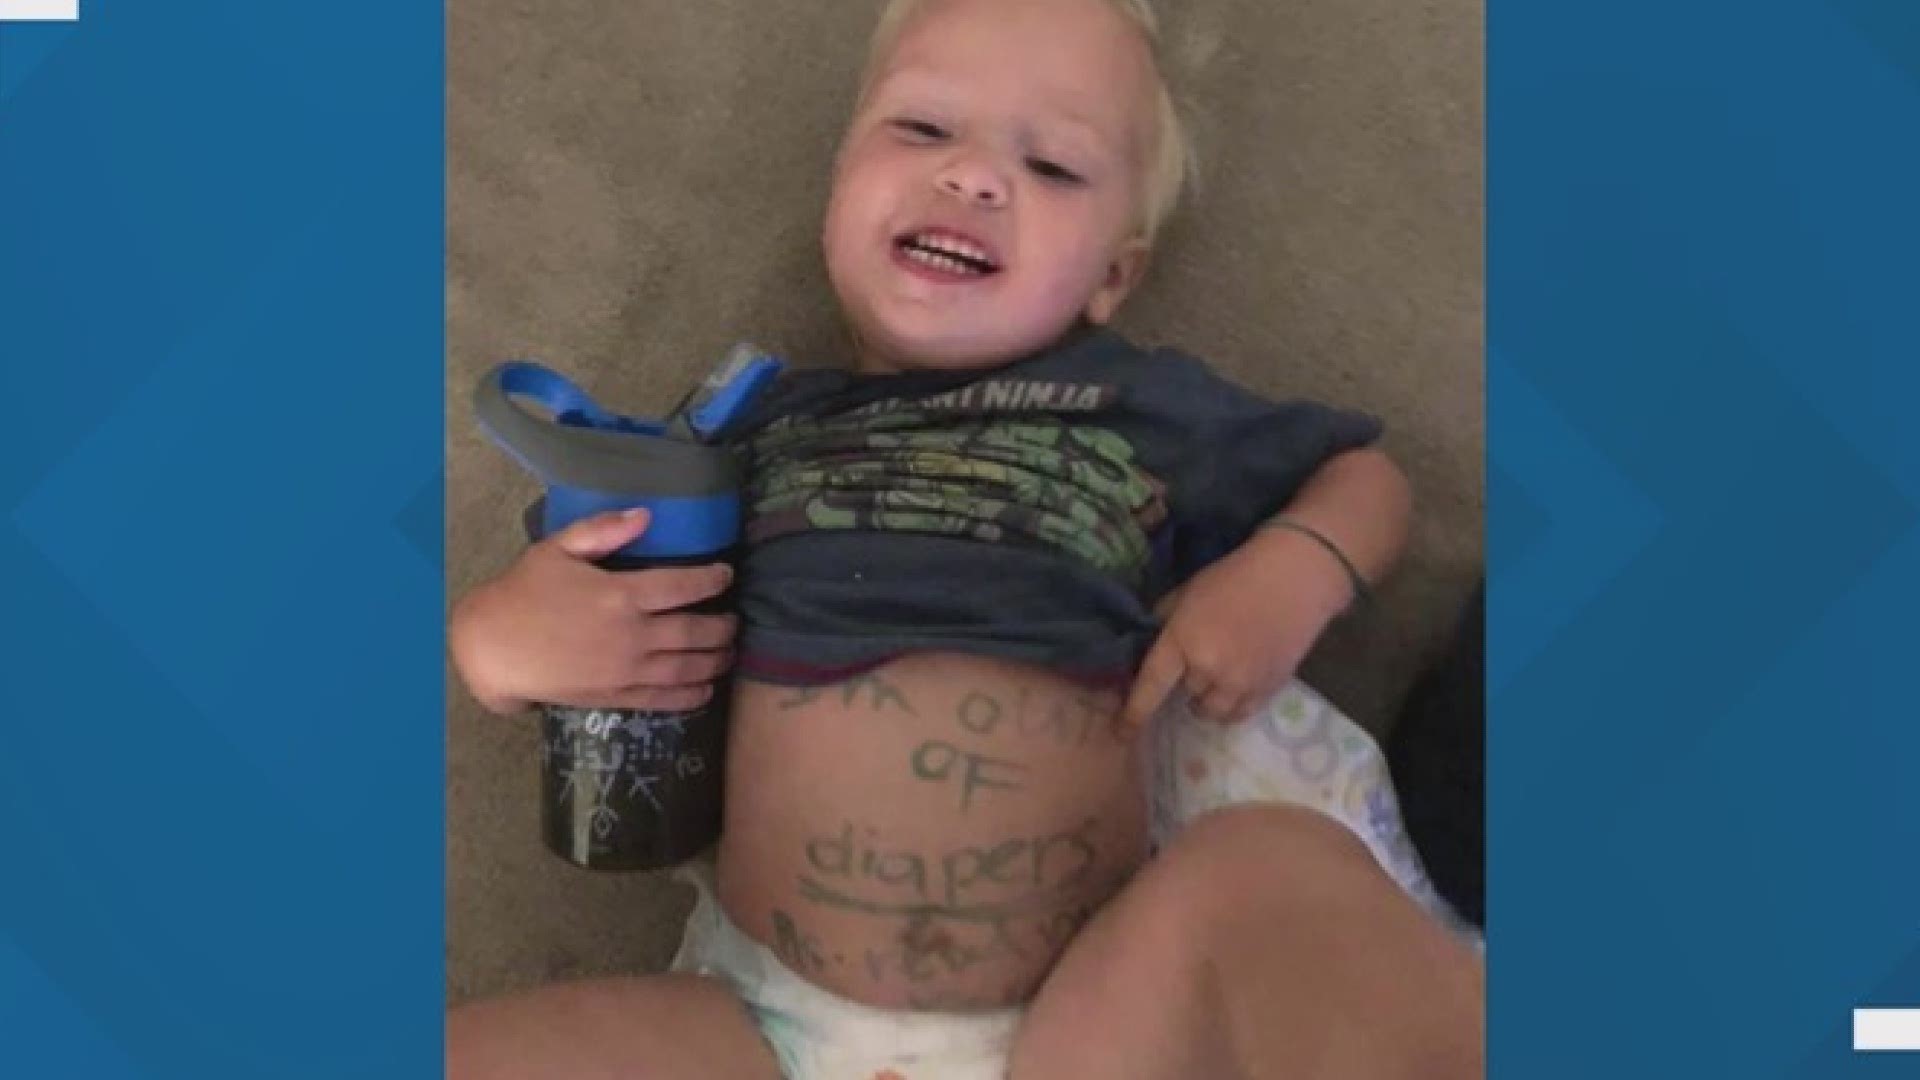 Heather Chisum wrote on Facebook her son, Milo, had a message on his stomach: "Mom I'm out of diapers..."